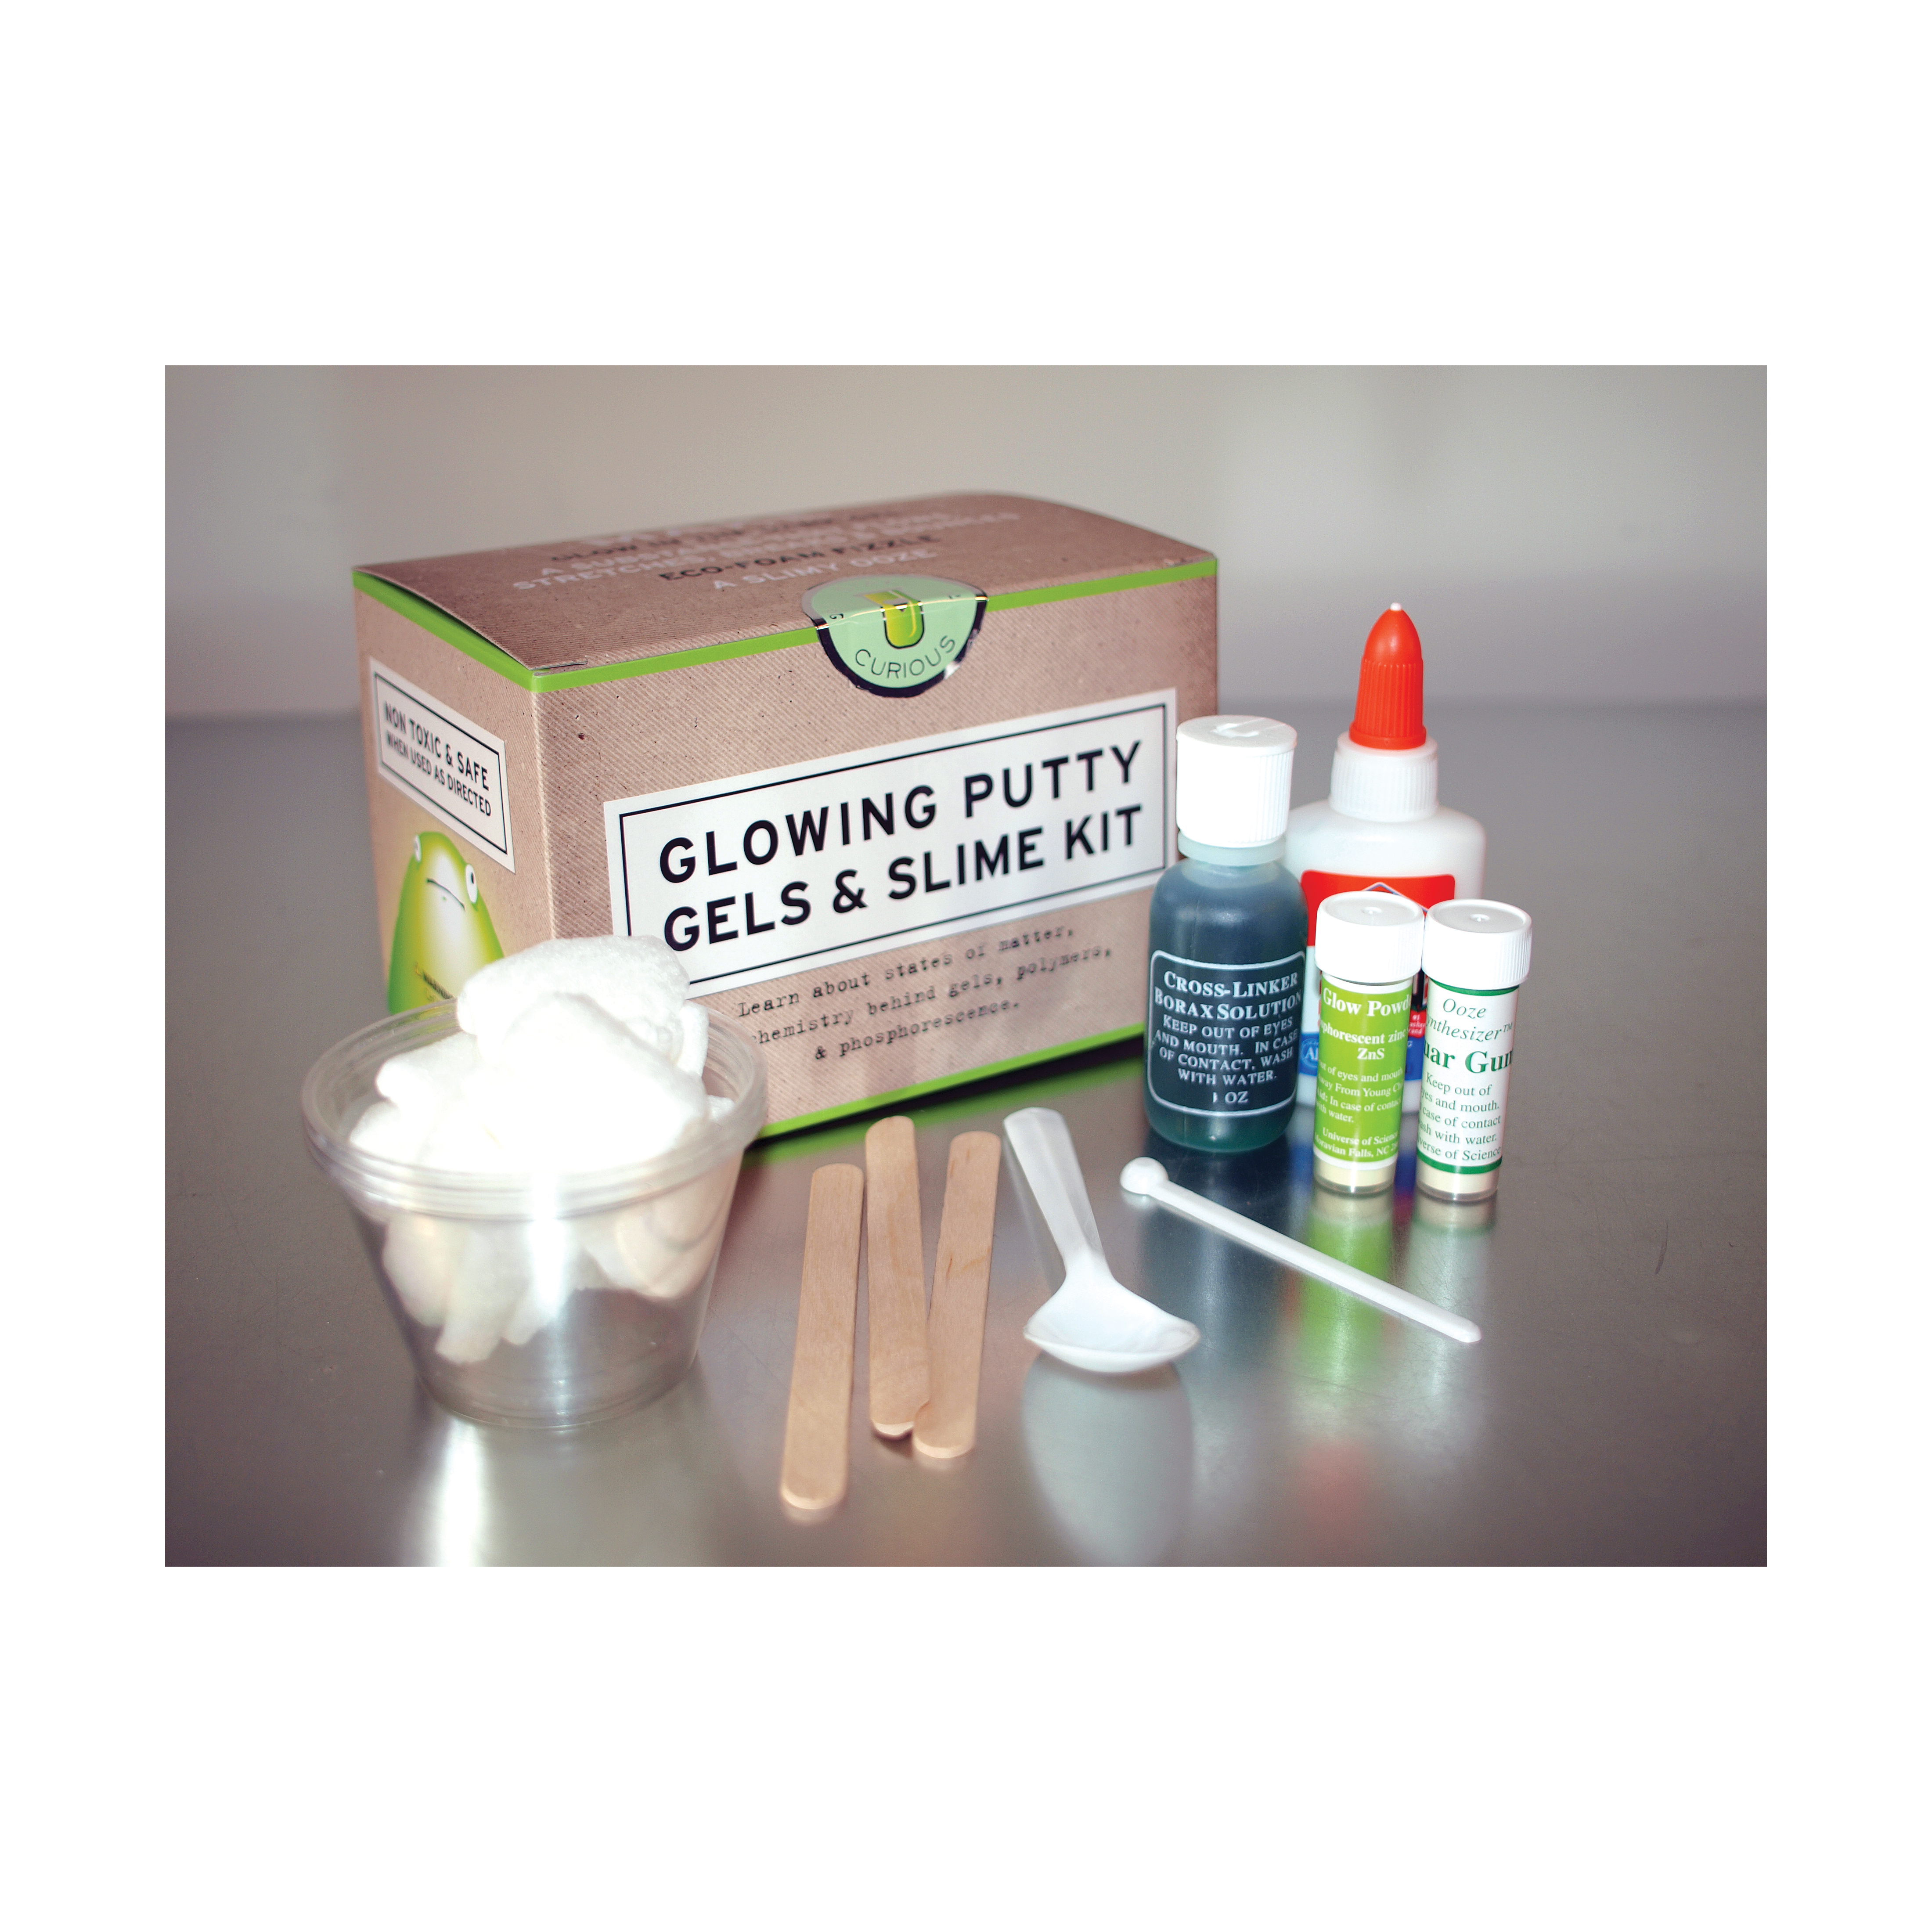 Copernicus Glowing Putty Gels & Slime Kit